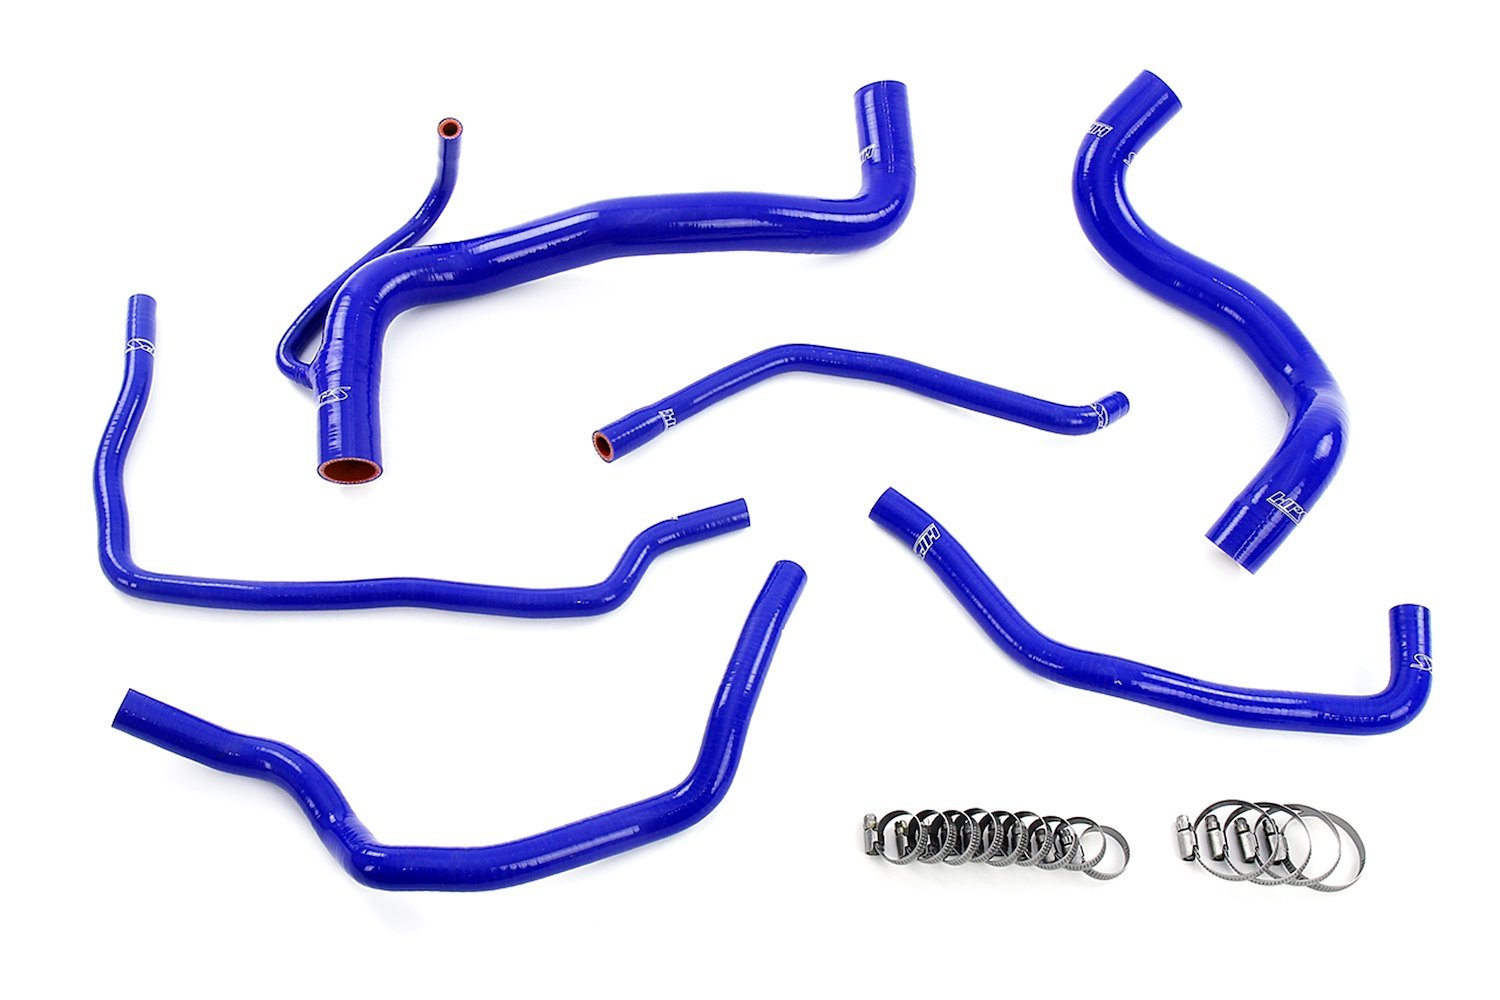 57-2149-BLUE Coolant Hose Kit, 3-Ply Reinforced Silicone, Replaces Radiator, Heater, & Expansion Tank Hoses